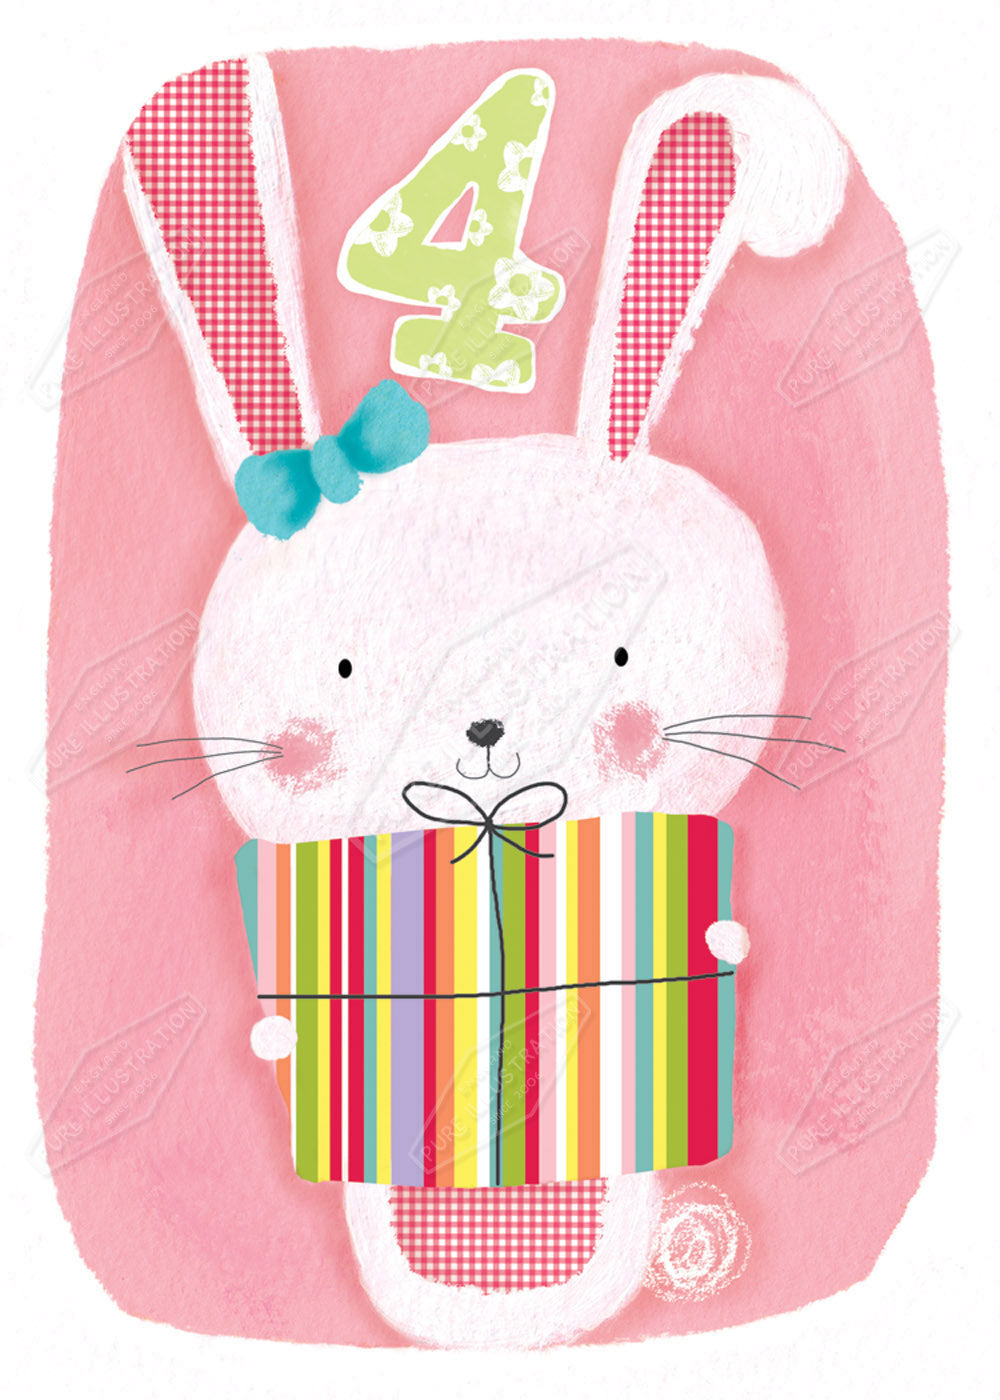 Birthday Rabbit Age Card Greeting Card Design by Cory Reid for Pure art Licensing Agency & Surface Design Studio